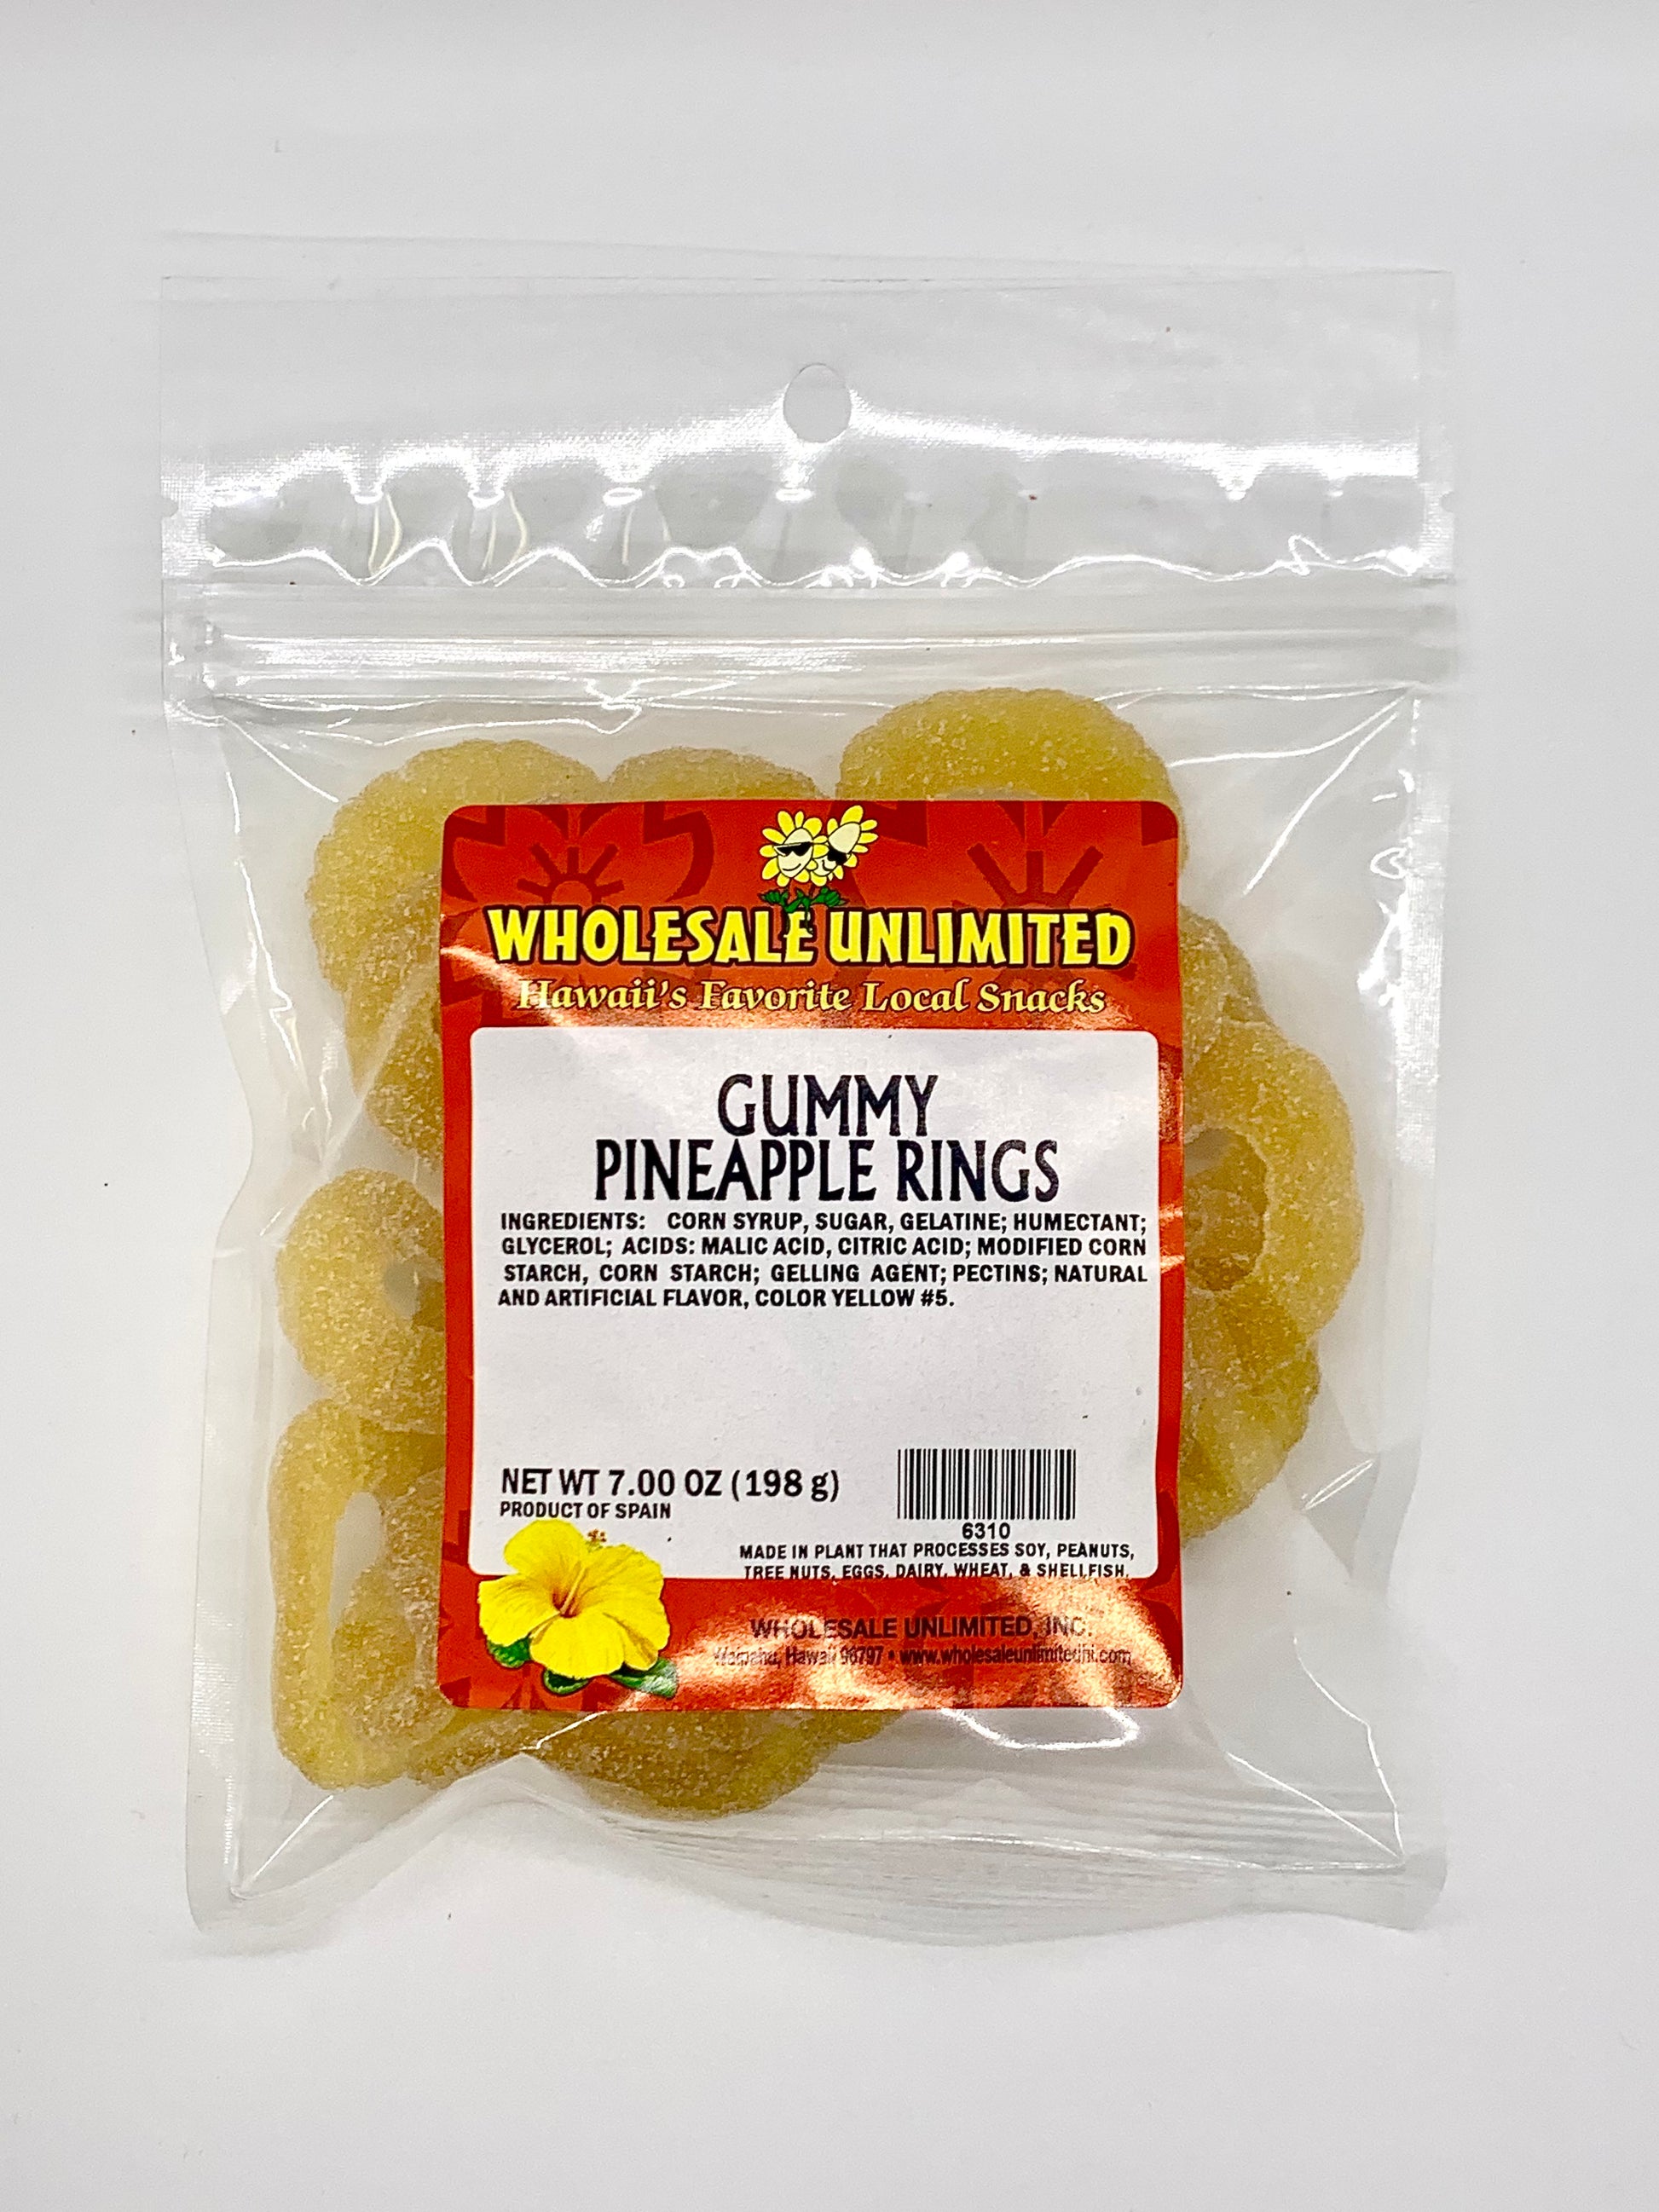 (NEW) Gummy Pineapple Rings - Wholesale Unlimited Inc.